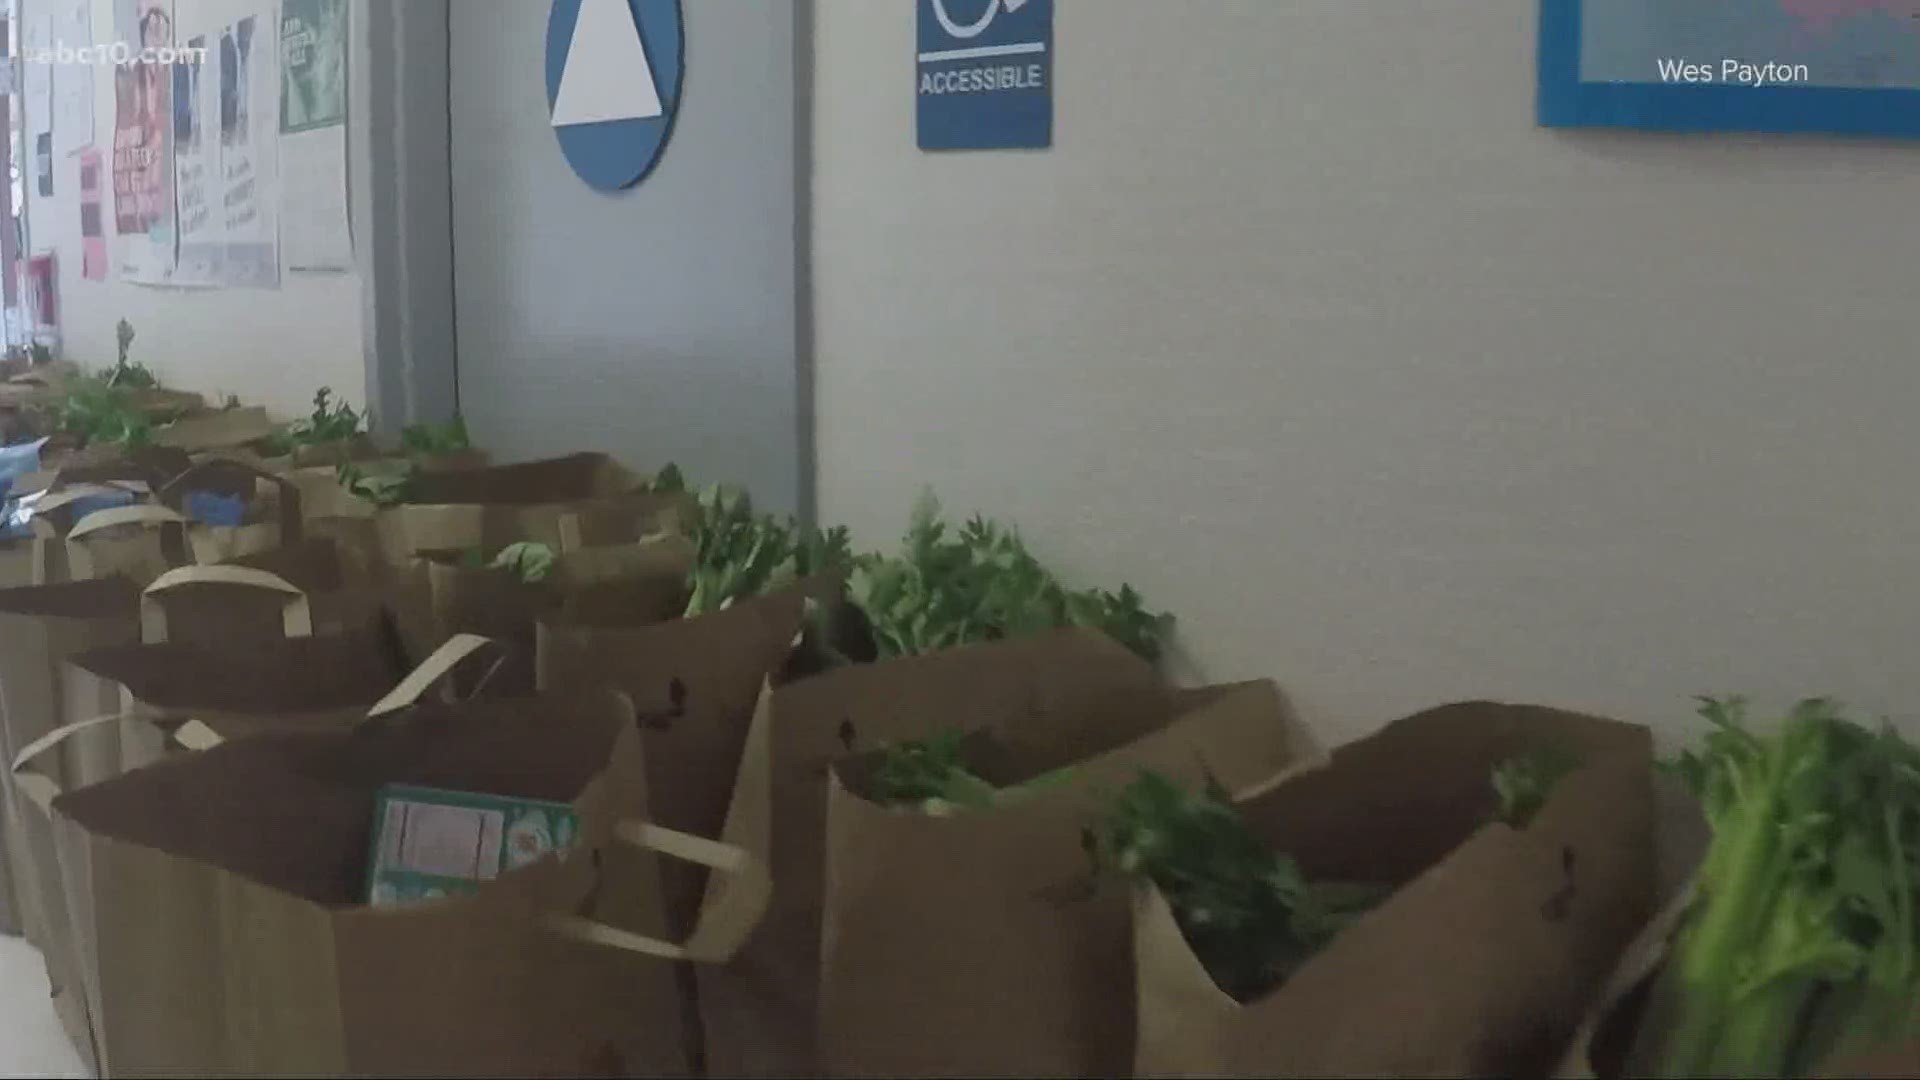 The Brown Bag program provides seniors who can't go grocery shopping with over 20 pounds of produce and other food.